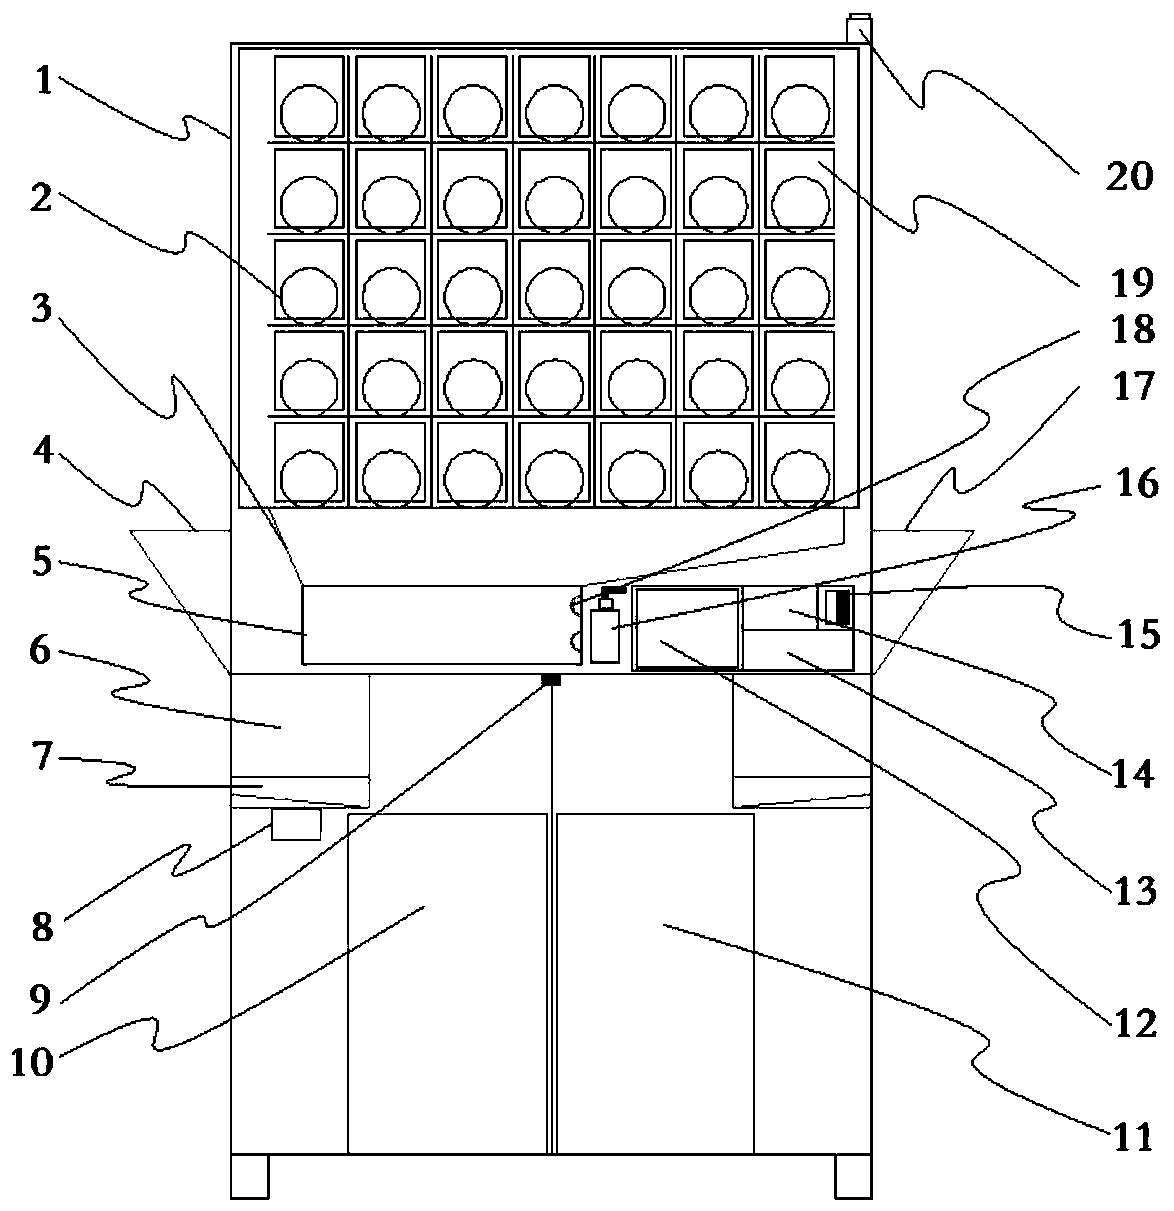 Self-service patient bedding and clothing replacing machine